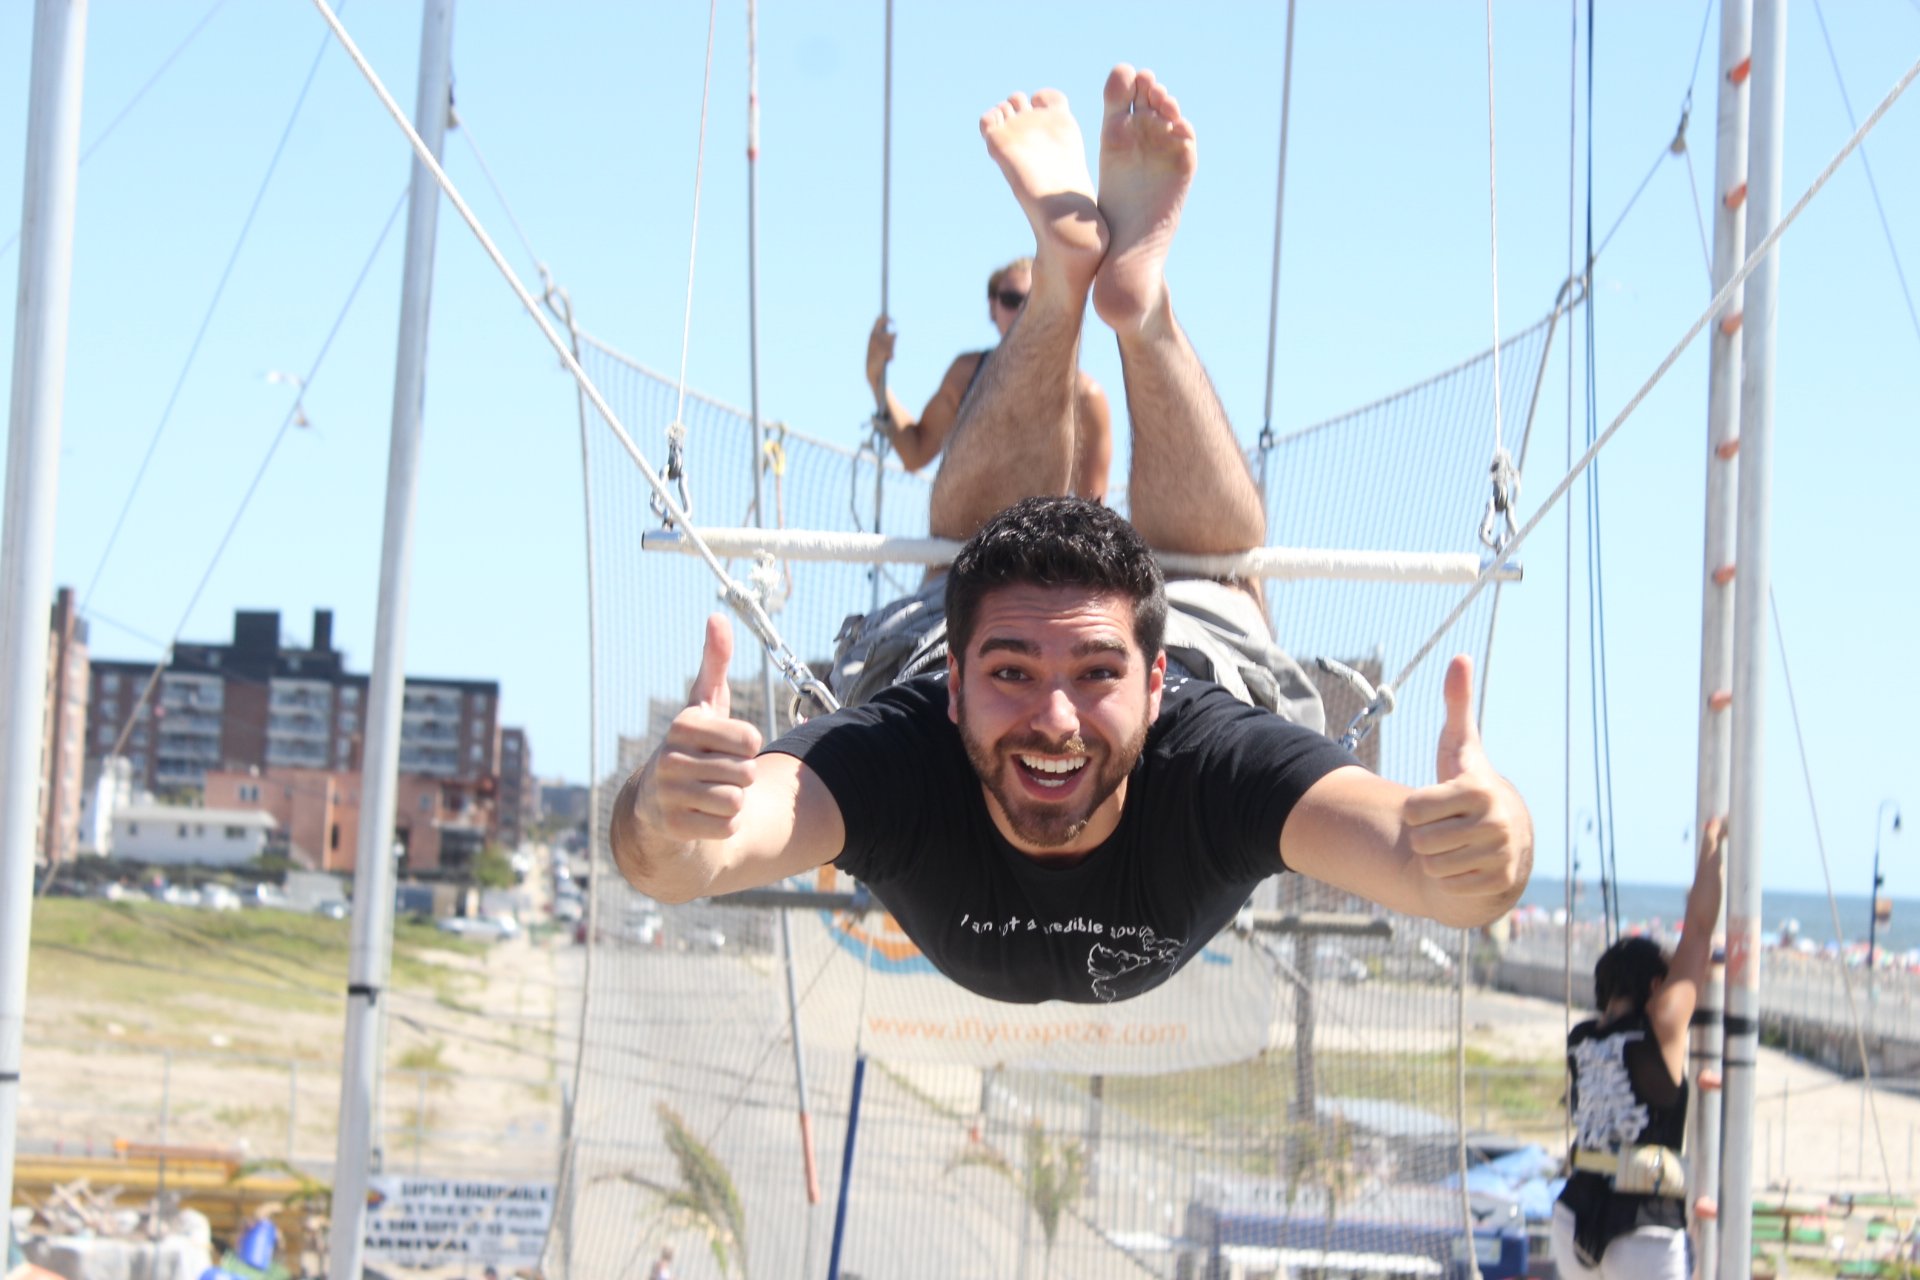 All Ages can fly on the trapeze